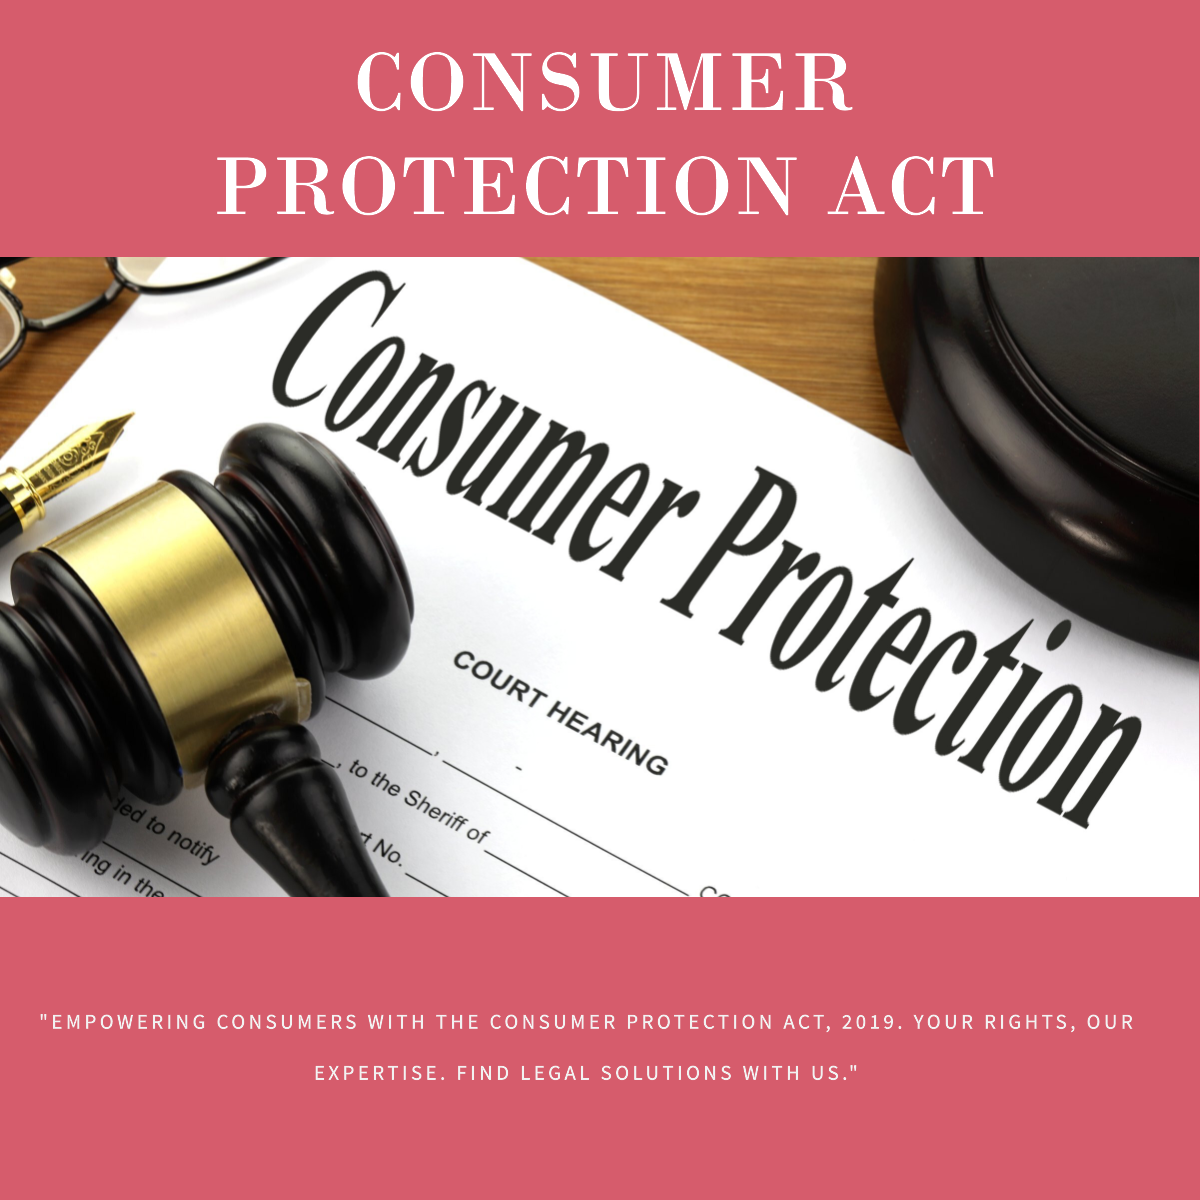 Consumer Protection Act: Safeguarding Your Rights